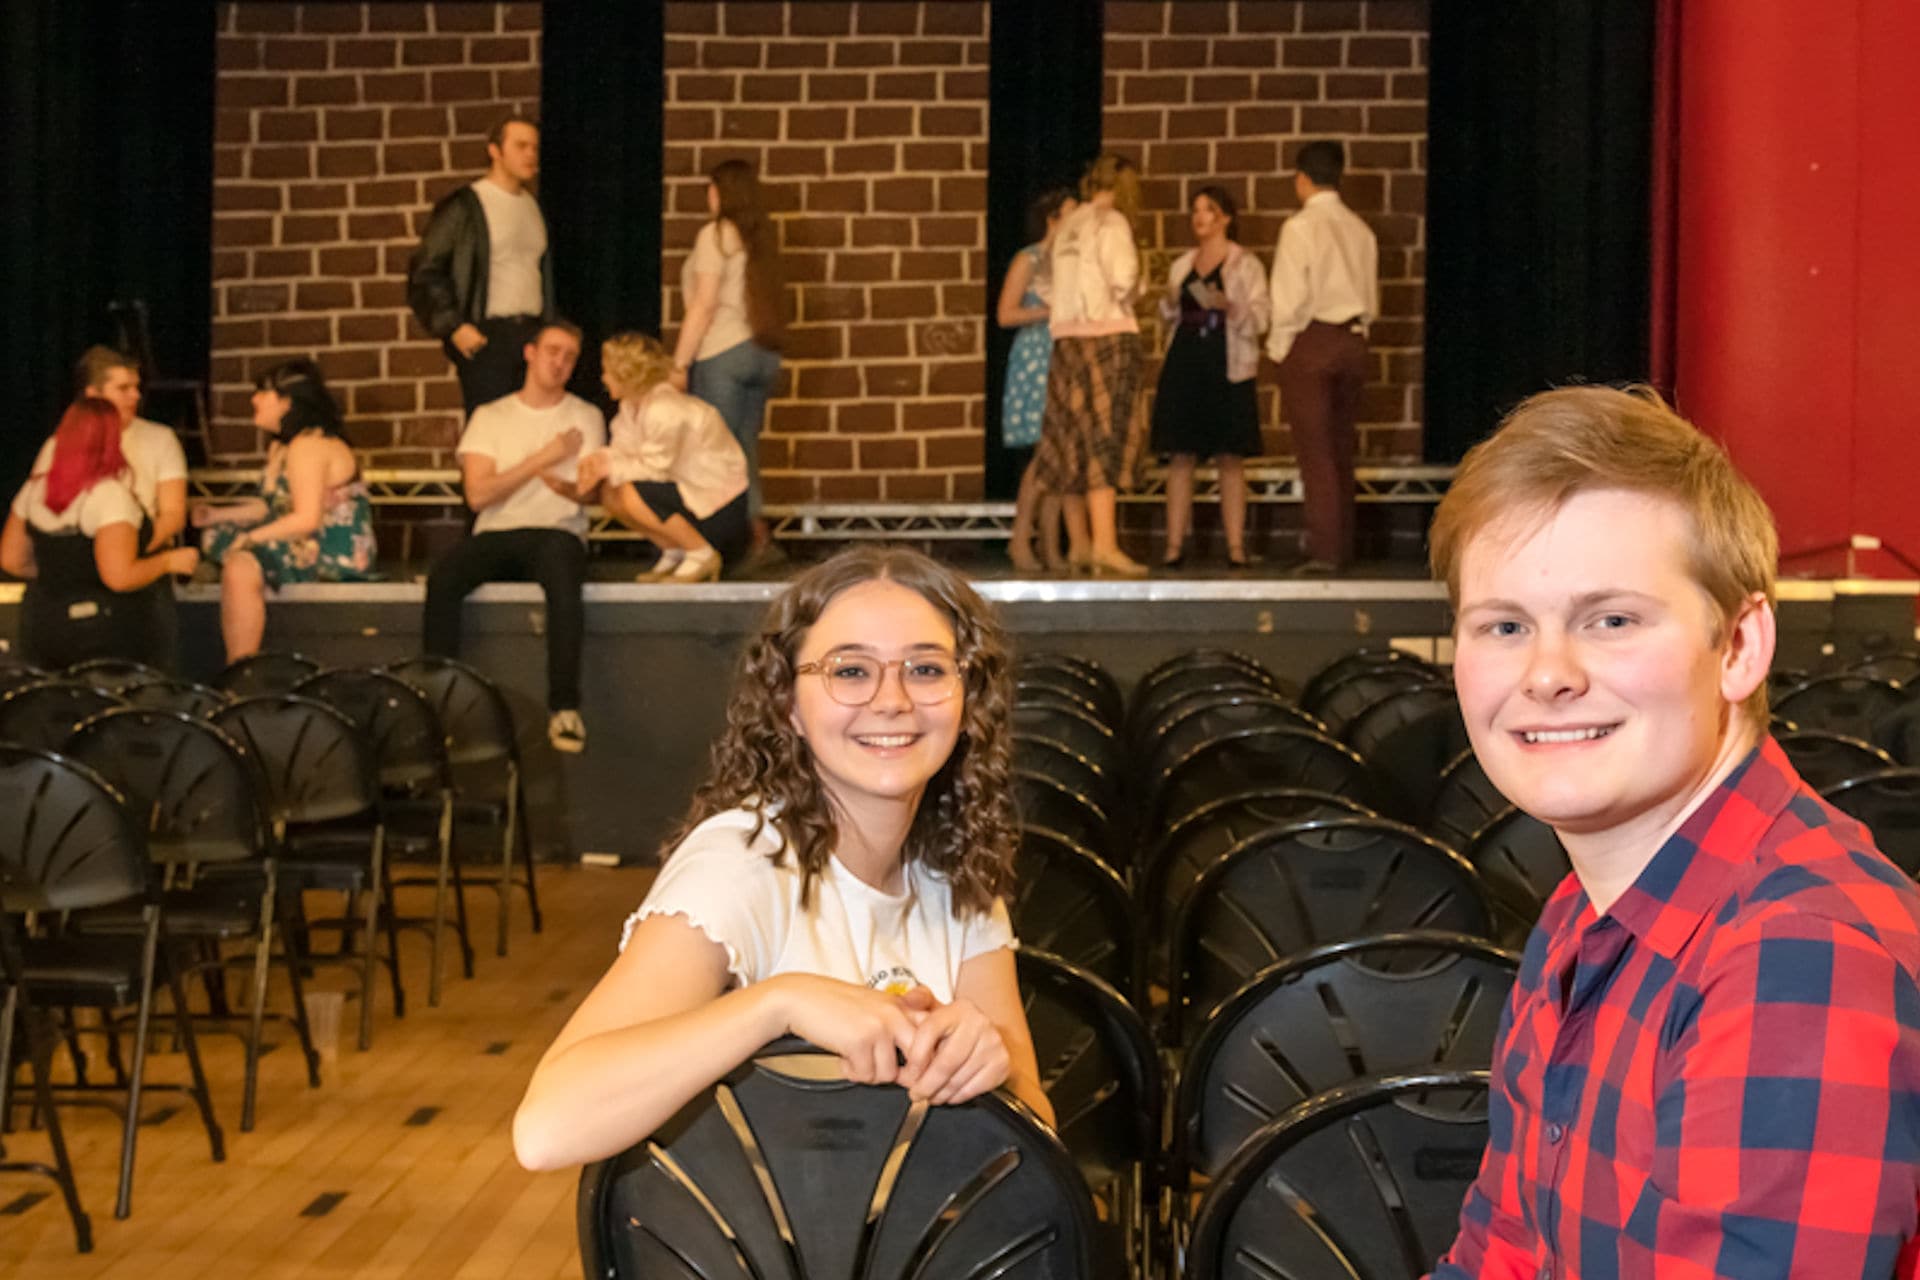 Students in theatre space smiling at camera with other students performing in background